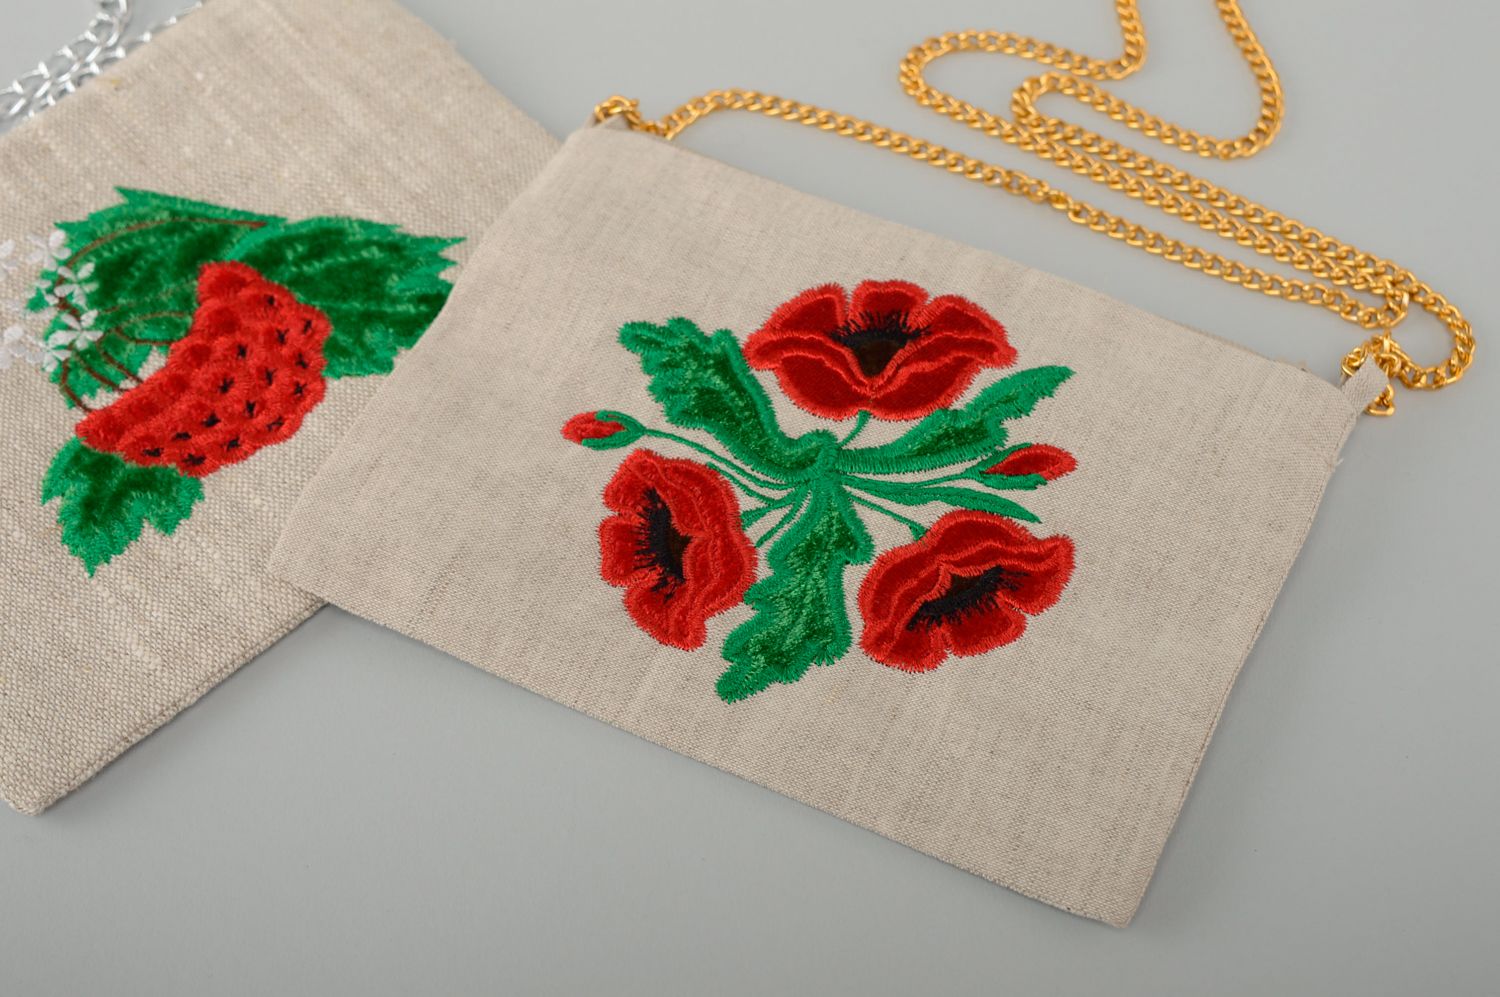 Handmade linen clutch bag with embroidery and applique work Poppies photo 5